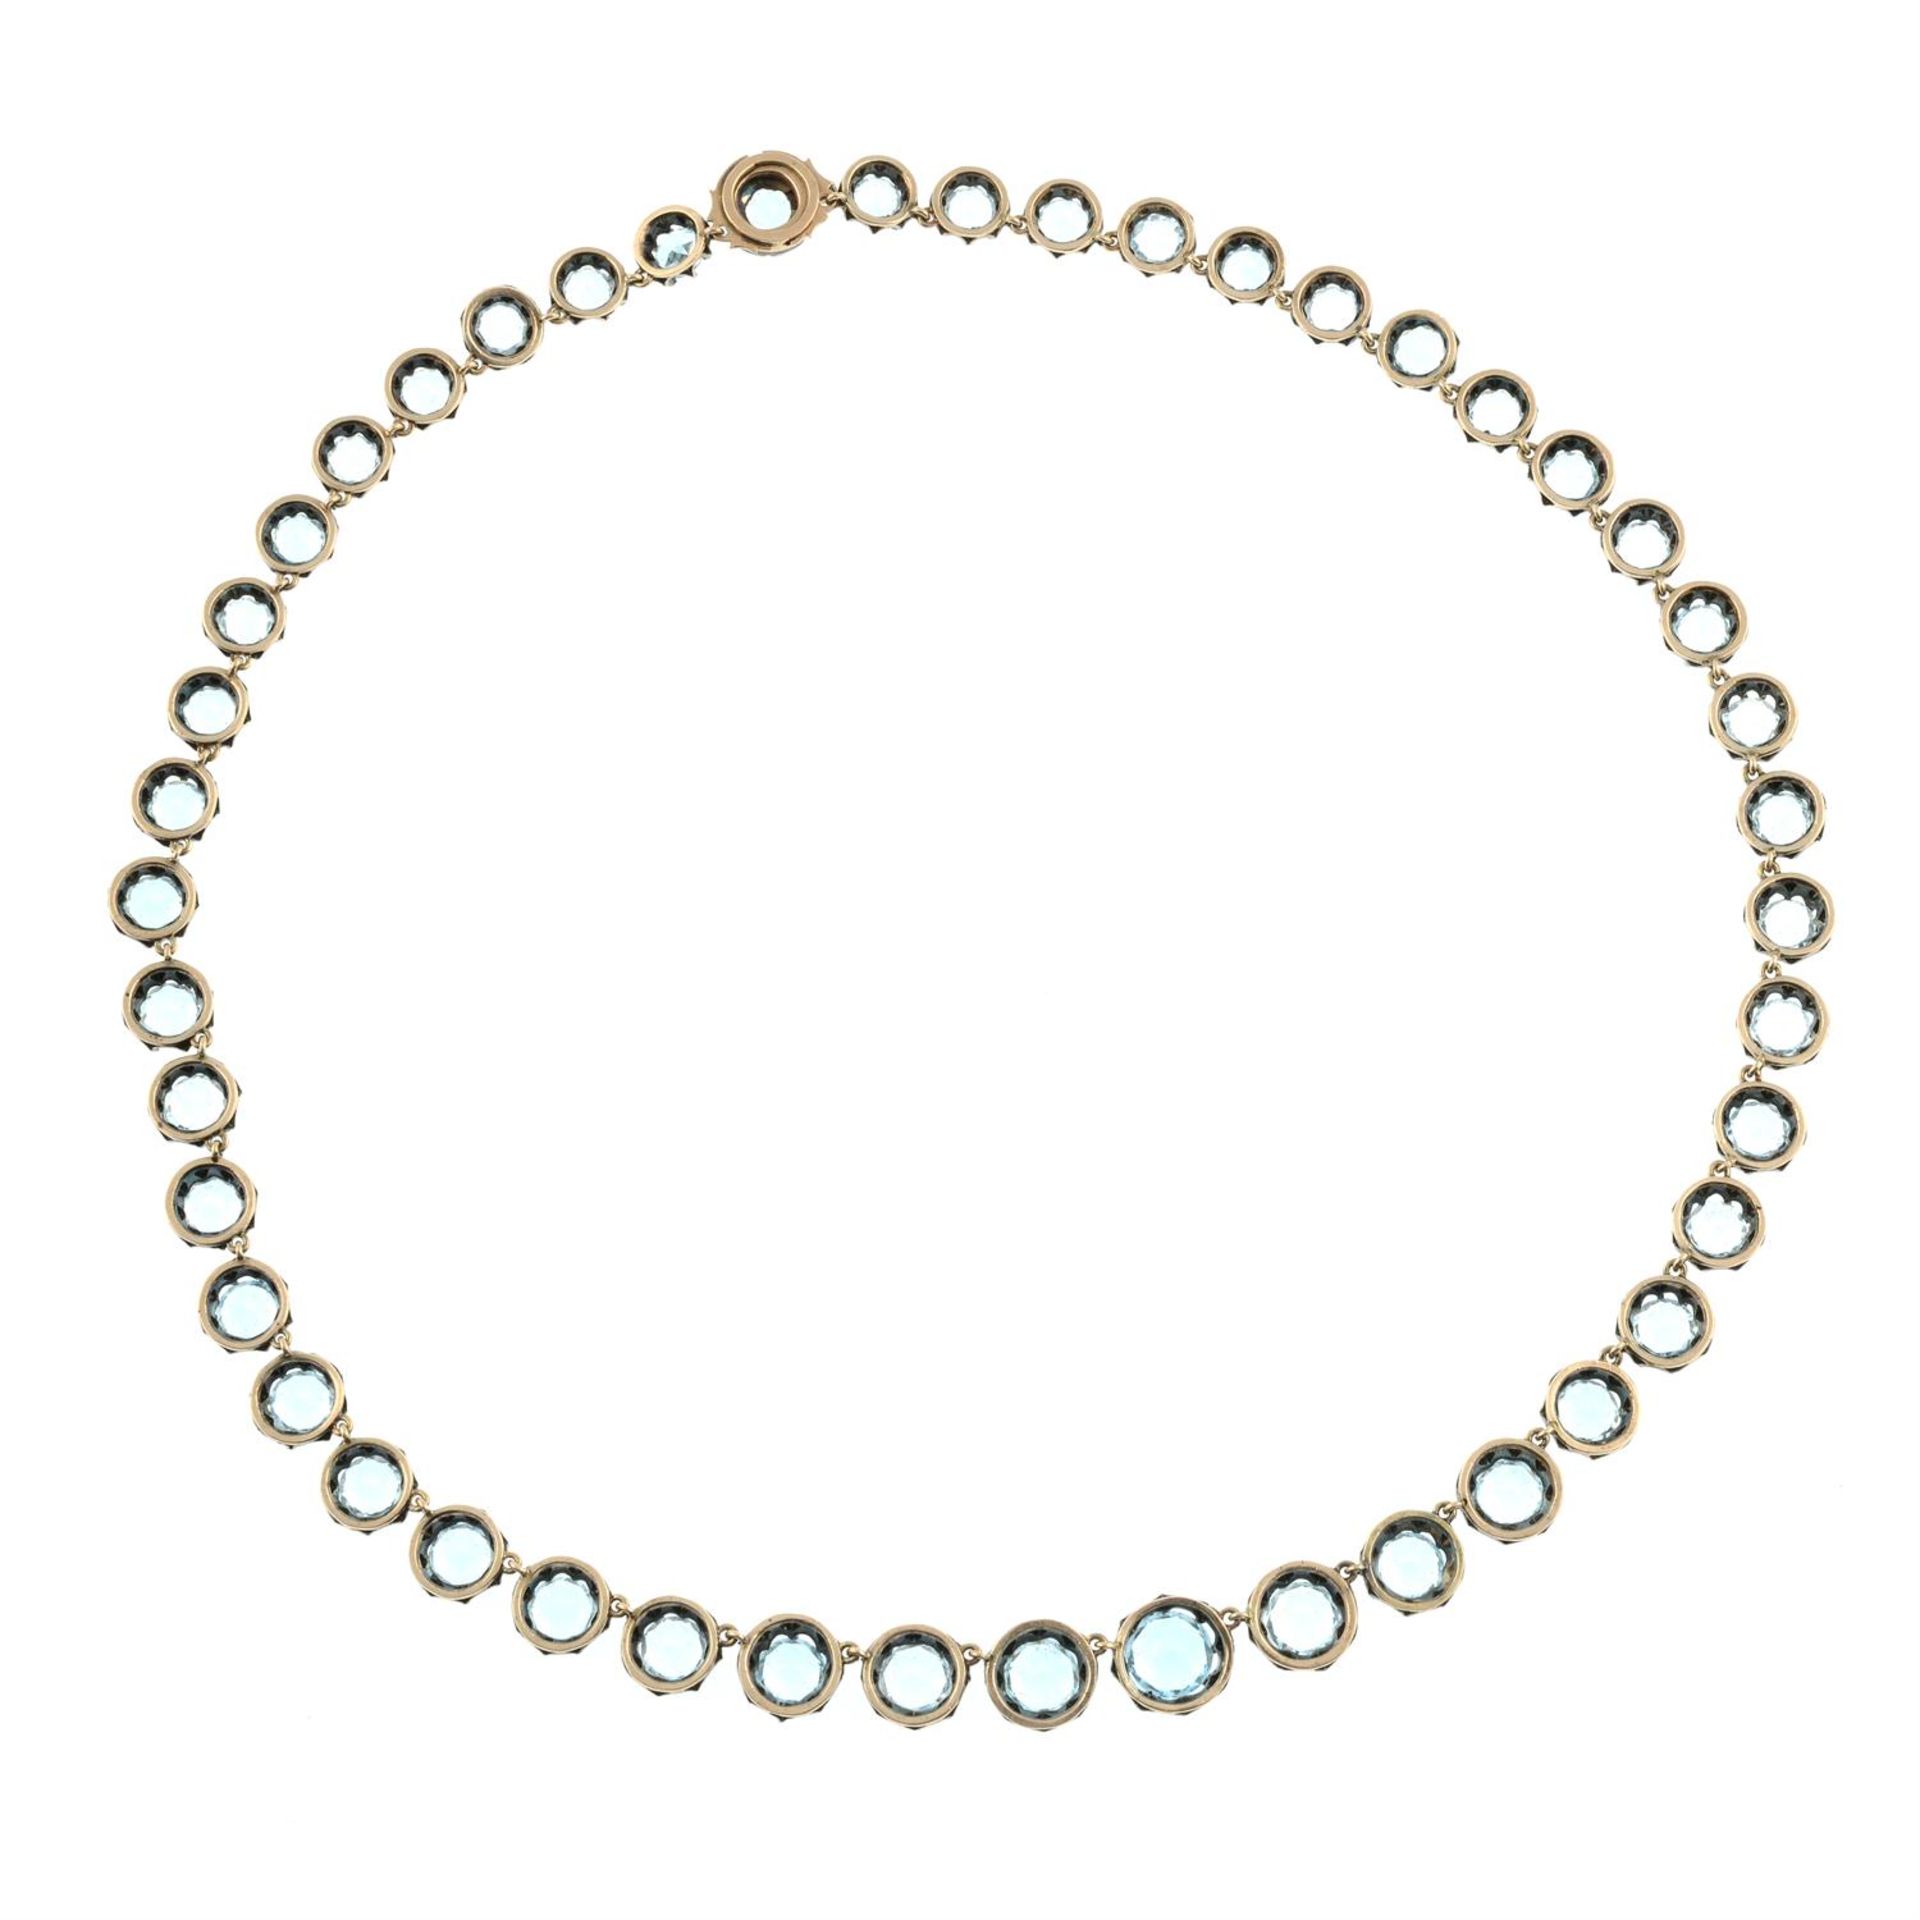 A 19th century silver and gold blue topaz rivière necklace. - Image 3 of 4